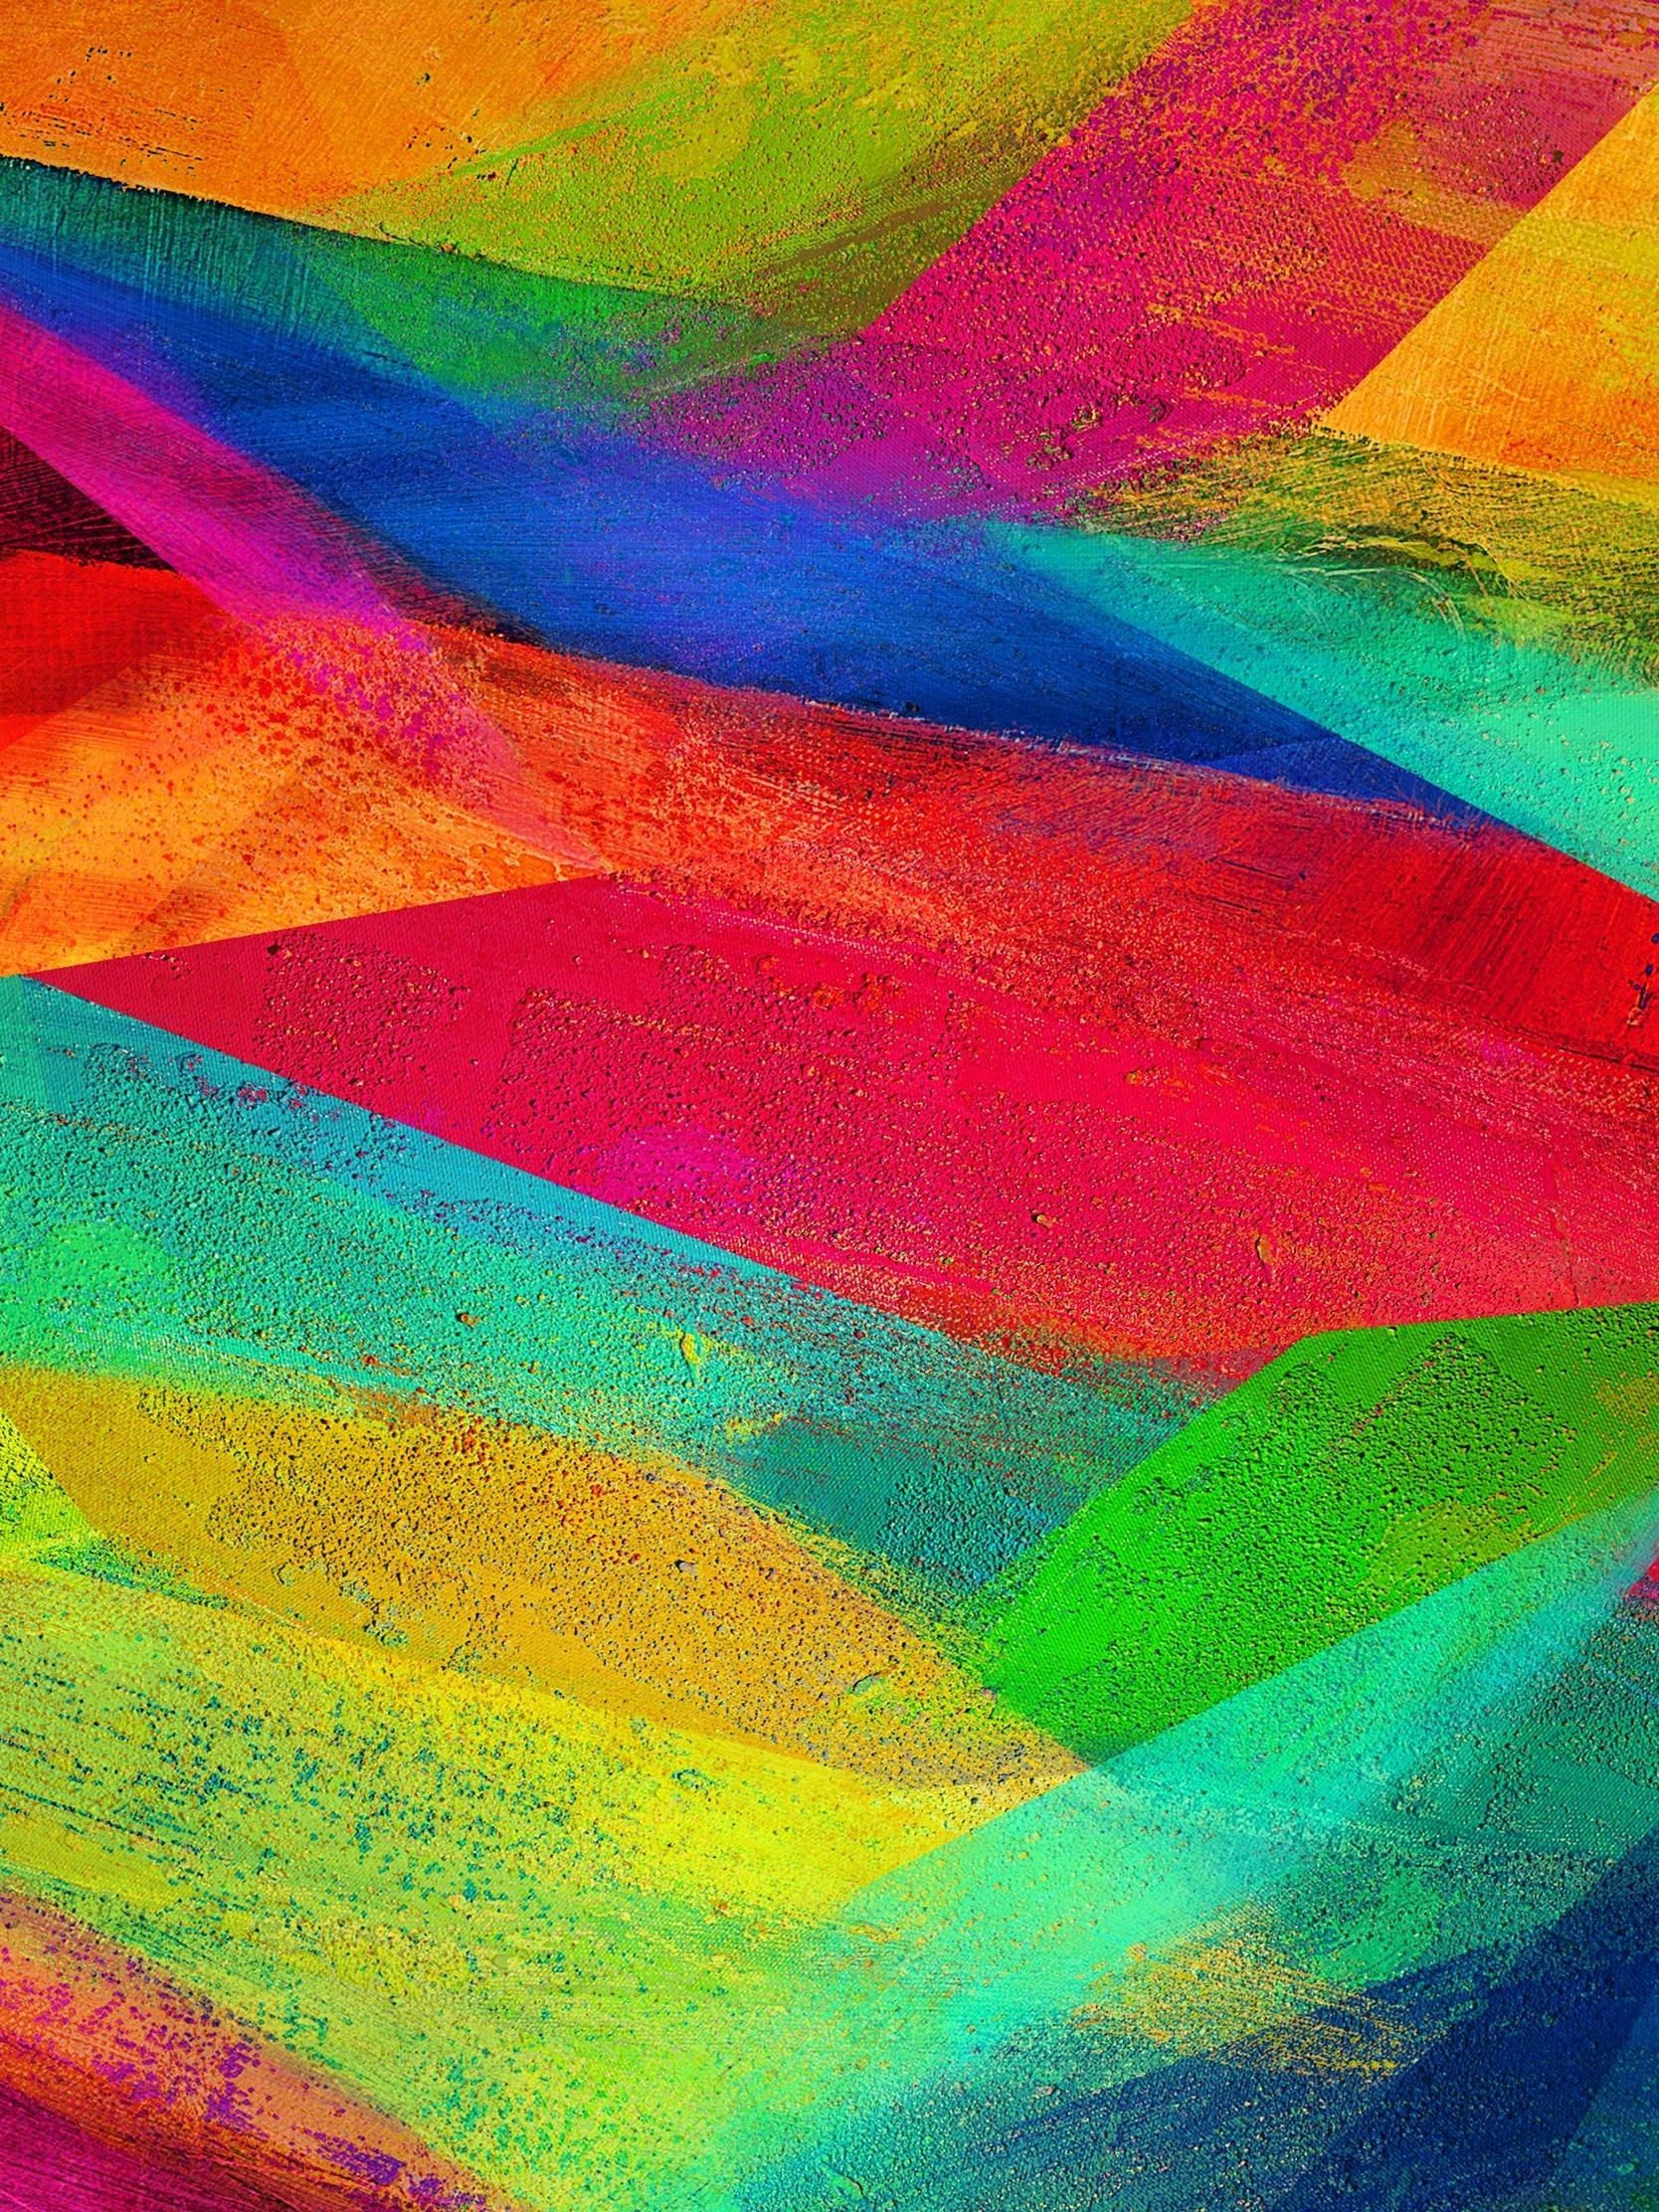 IPhone wallpaper with abstract colorful background - Colorful